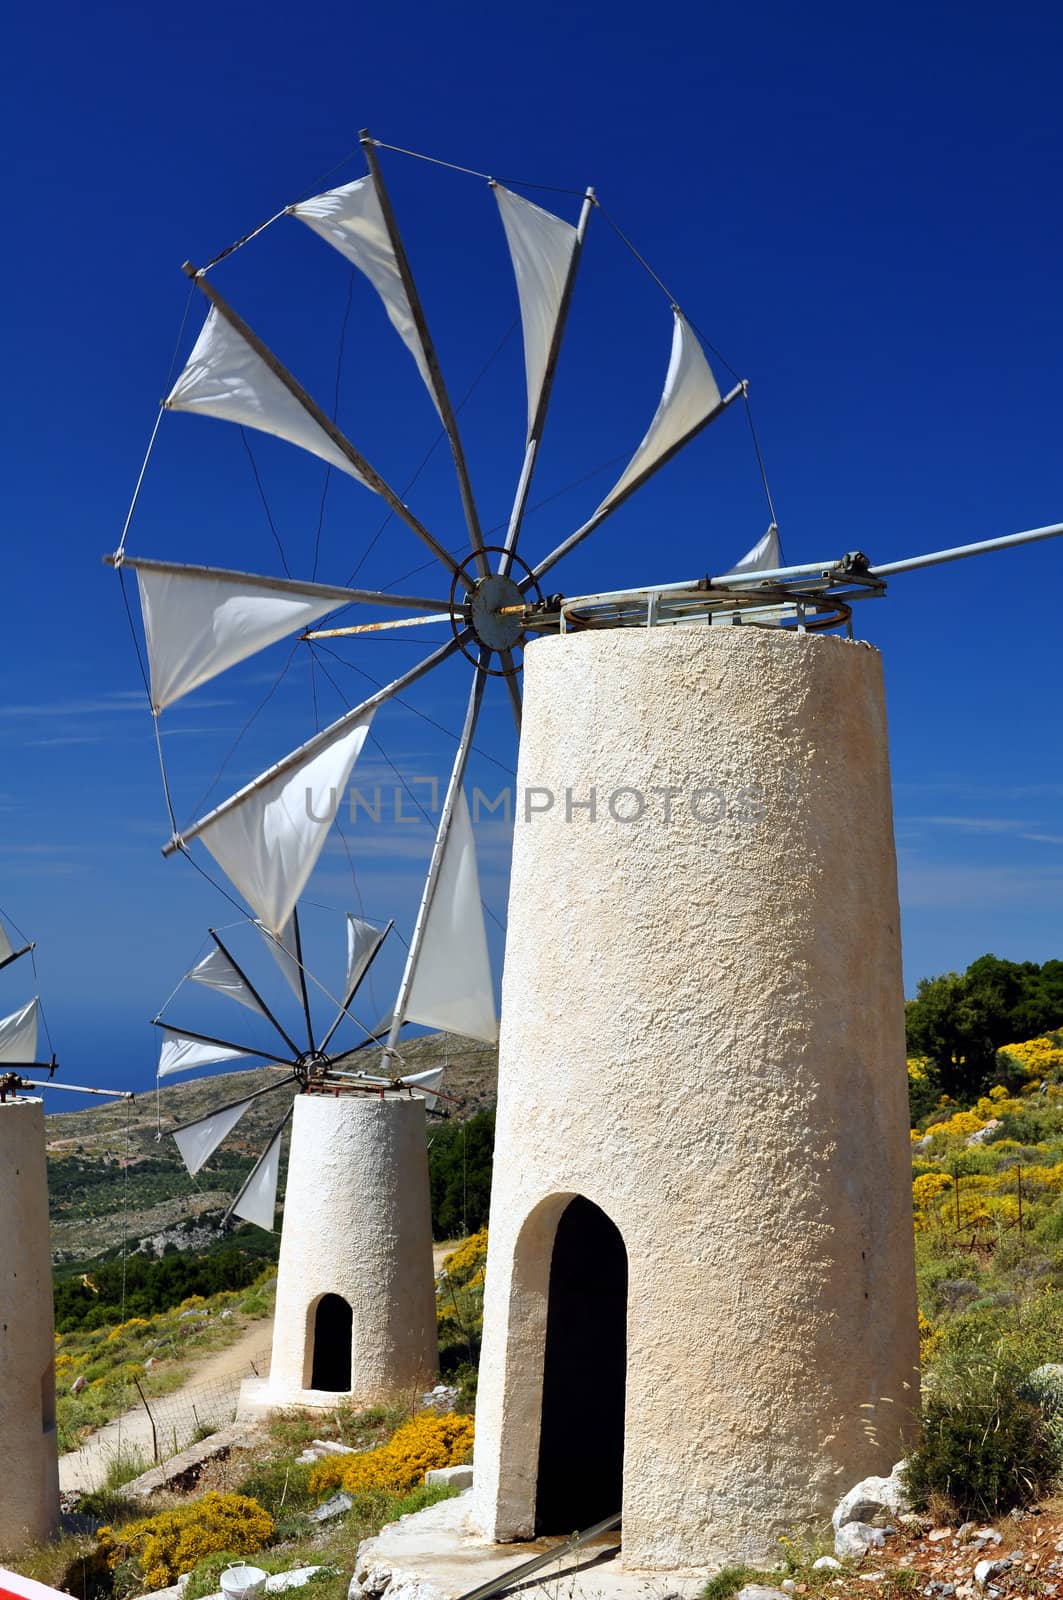 Wind mills in Crete by FER737NG